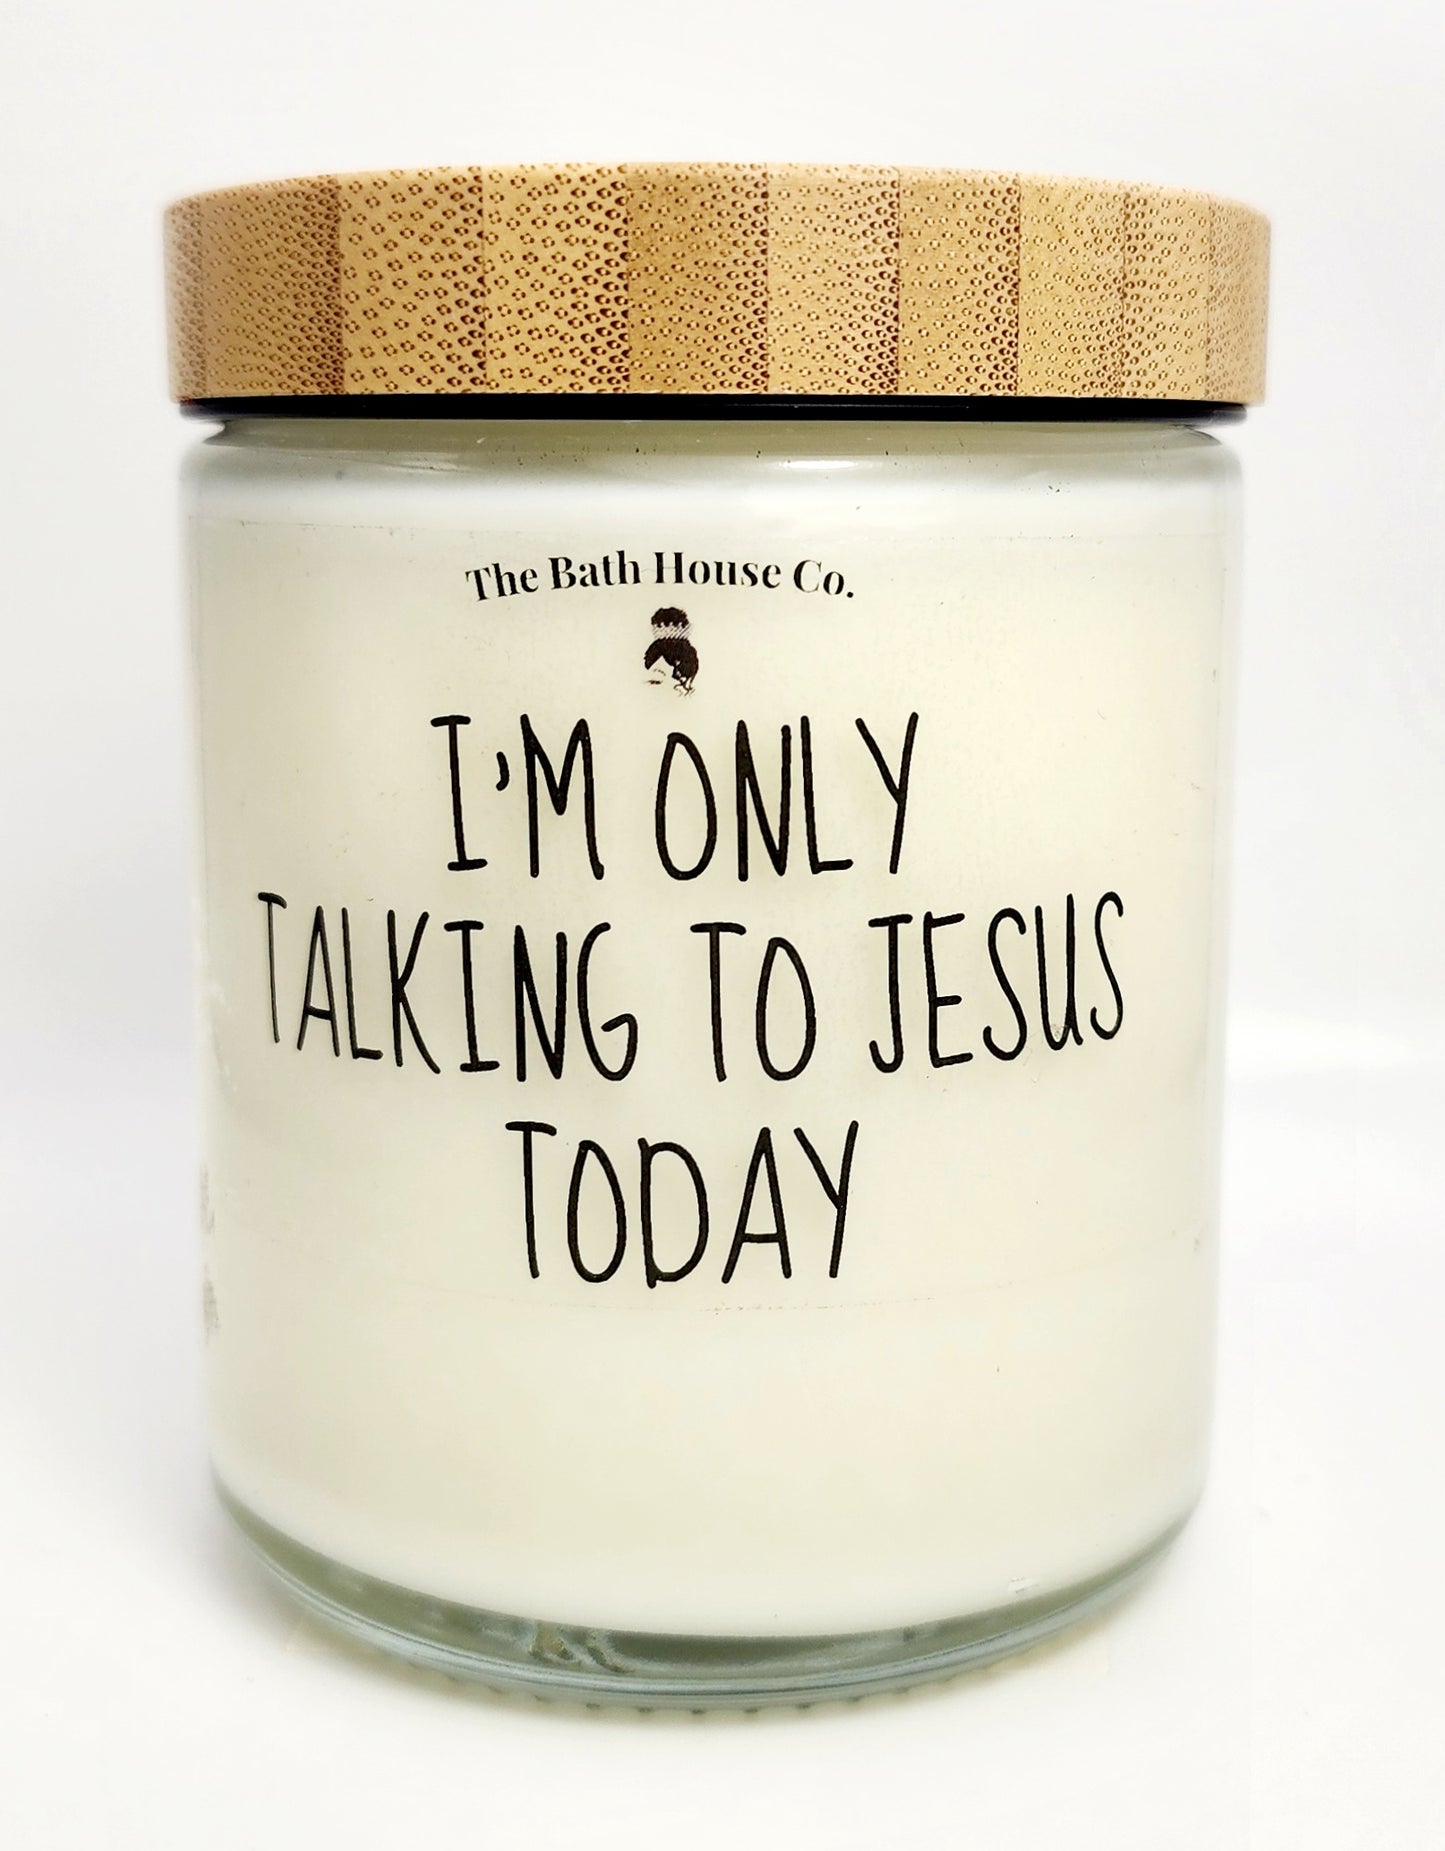 I'm only talking to jesus today